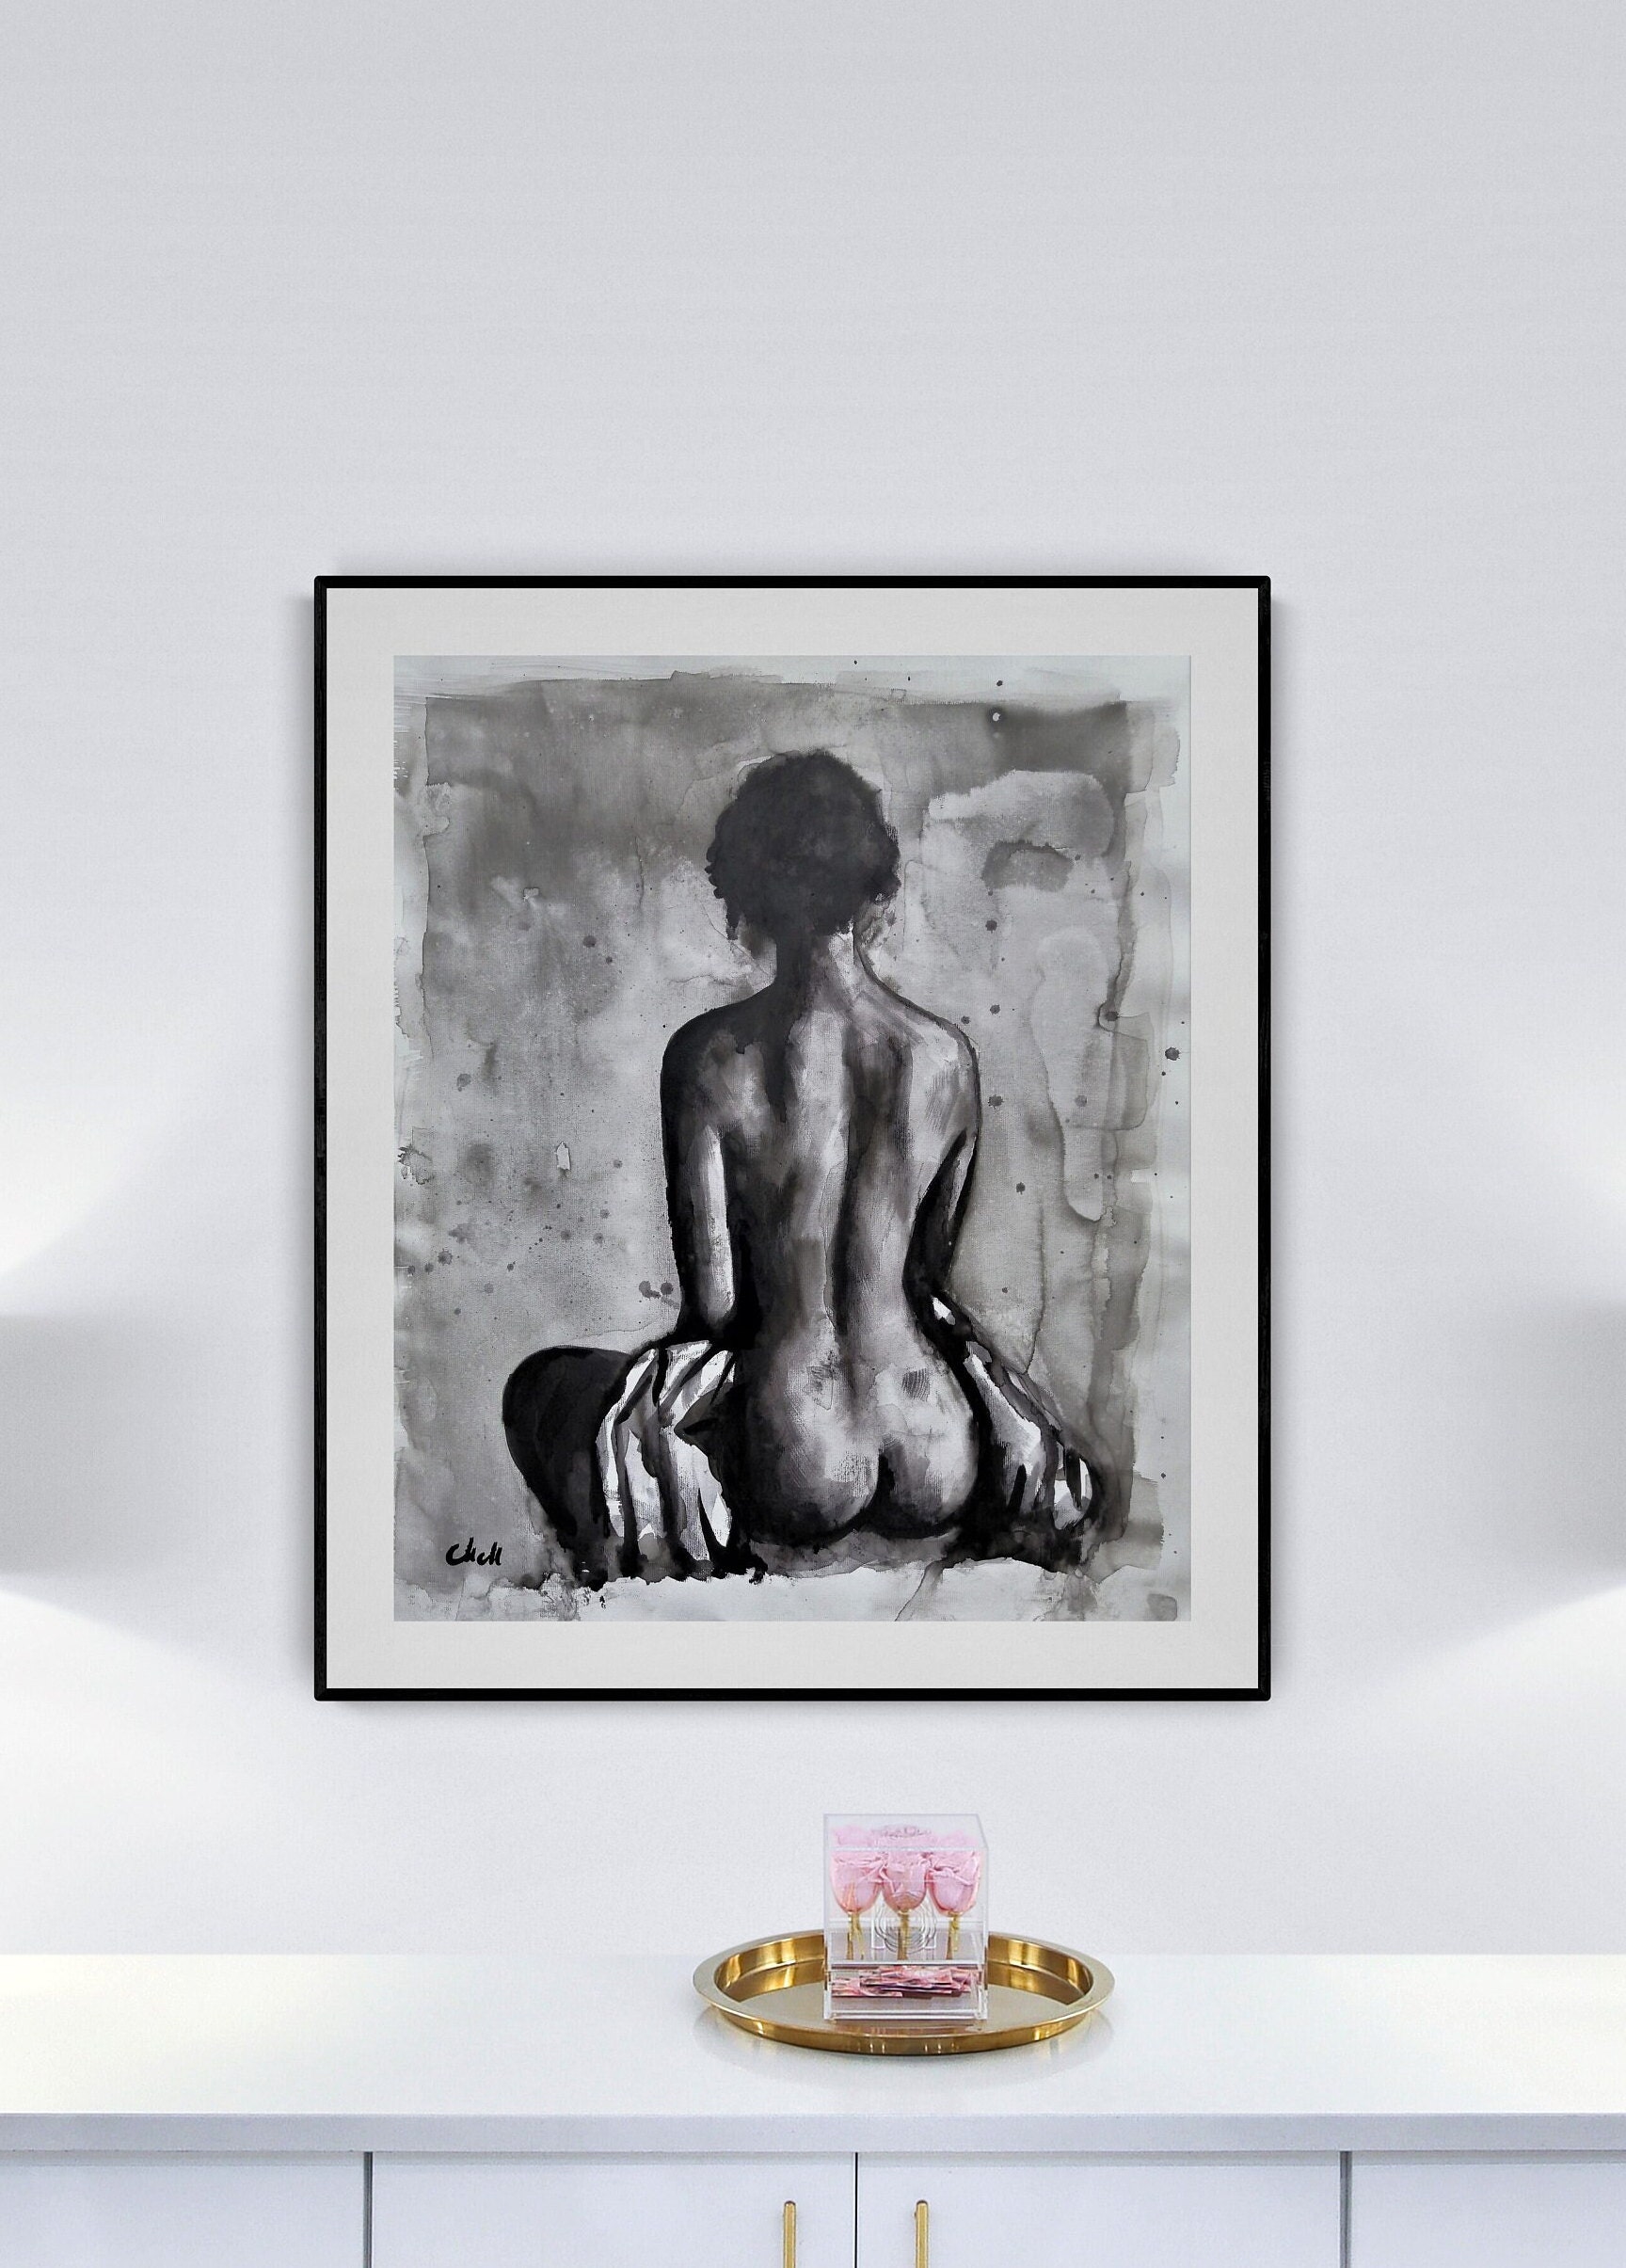 homemade tube shy nude painting popular Sex Images Hq